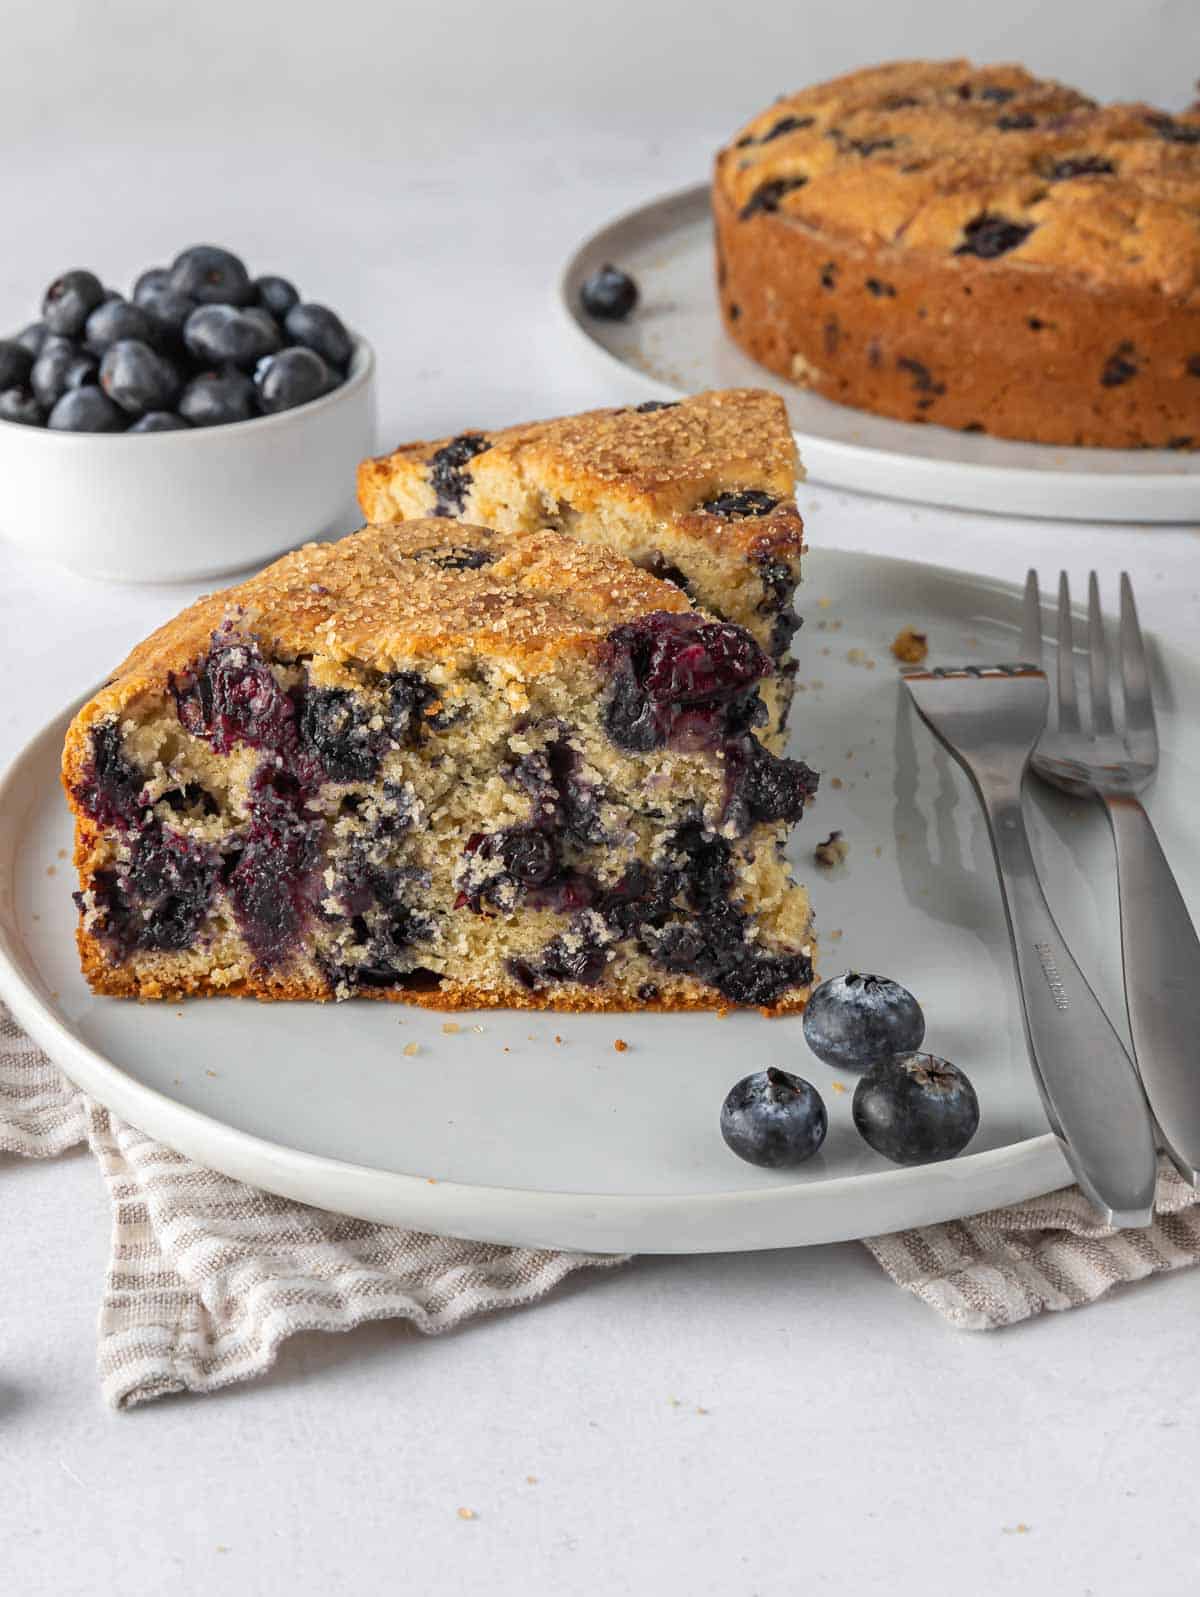 Two slices of coffee cake with blueberries on a plate with forks and fresh blueberries.